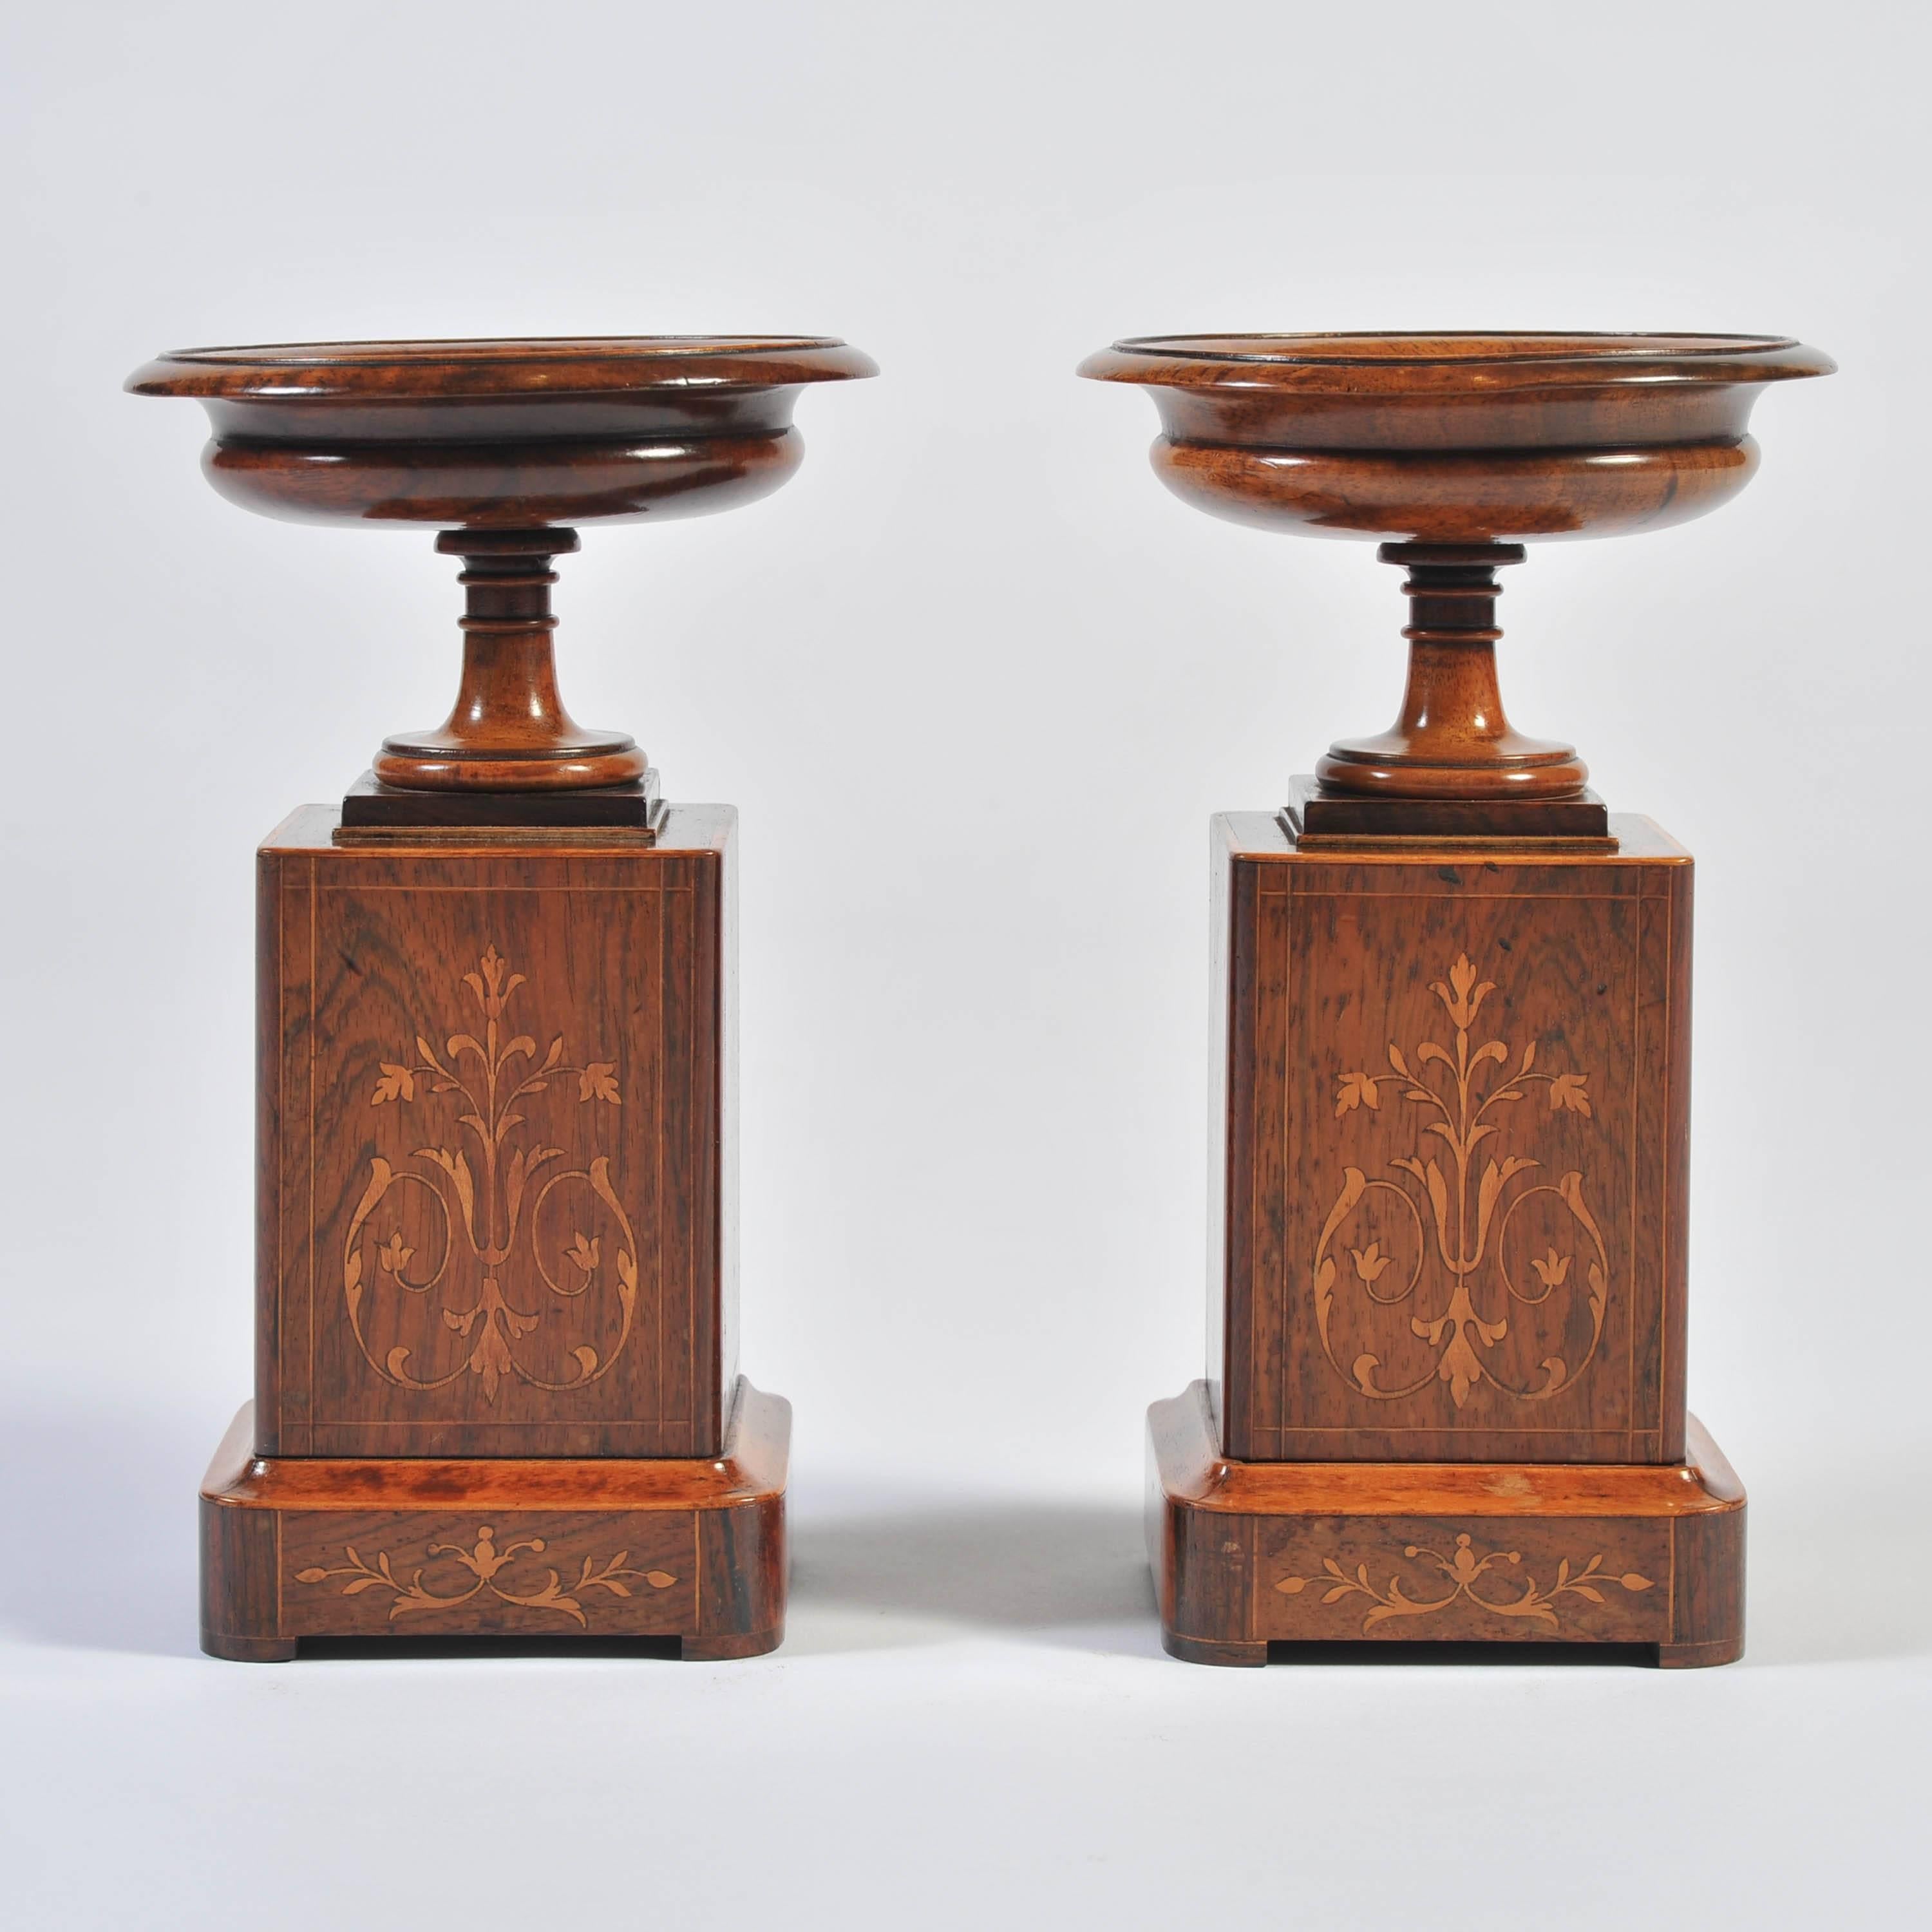 The kylix shape turned dishes of walnut with central ebony and boxwood inlaid paterae, on square block supports and plinths of rosewood with further fine boxwood marquetry.